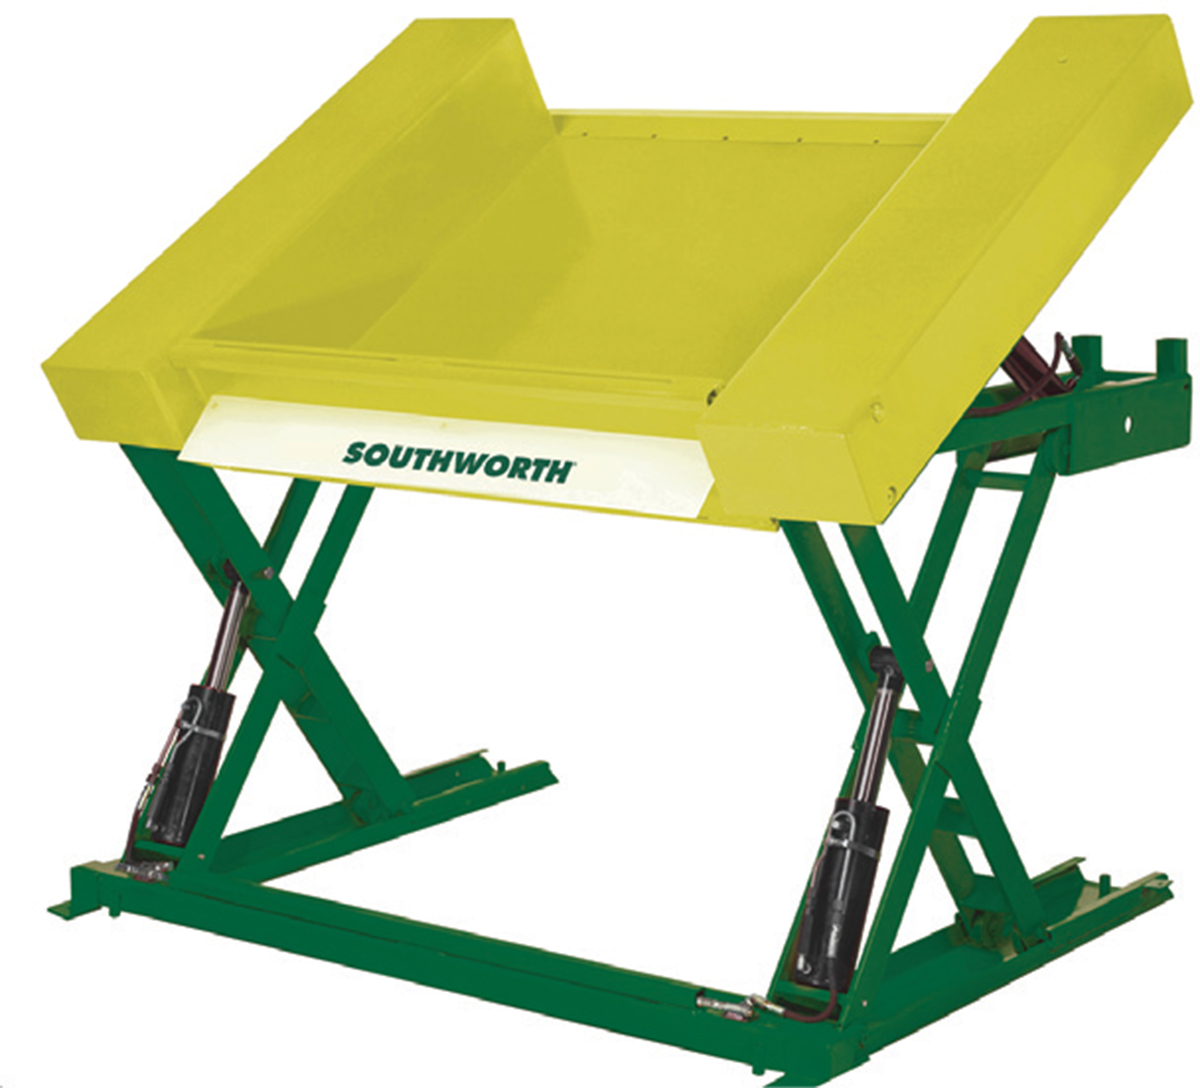 ZLS-T lifter and tilter: independent lift/tilt controls, flush with floor when lowered, raises to 33.5 in., tilts up to 30 deg, 2,000-lb or 4,000-lb capacity, powered by 1-hp motor